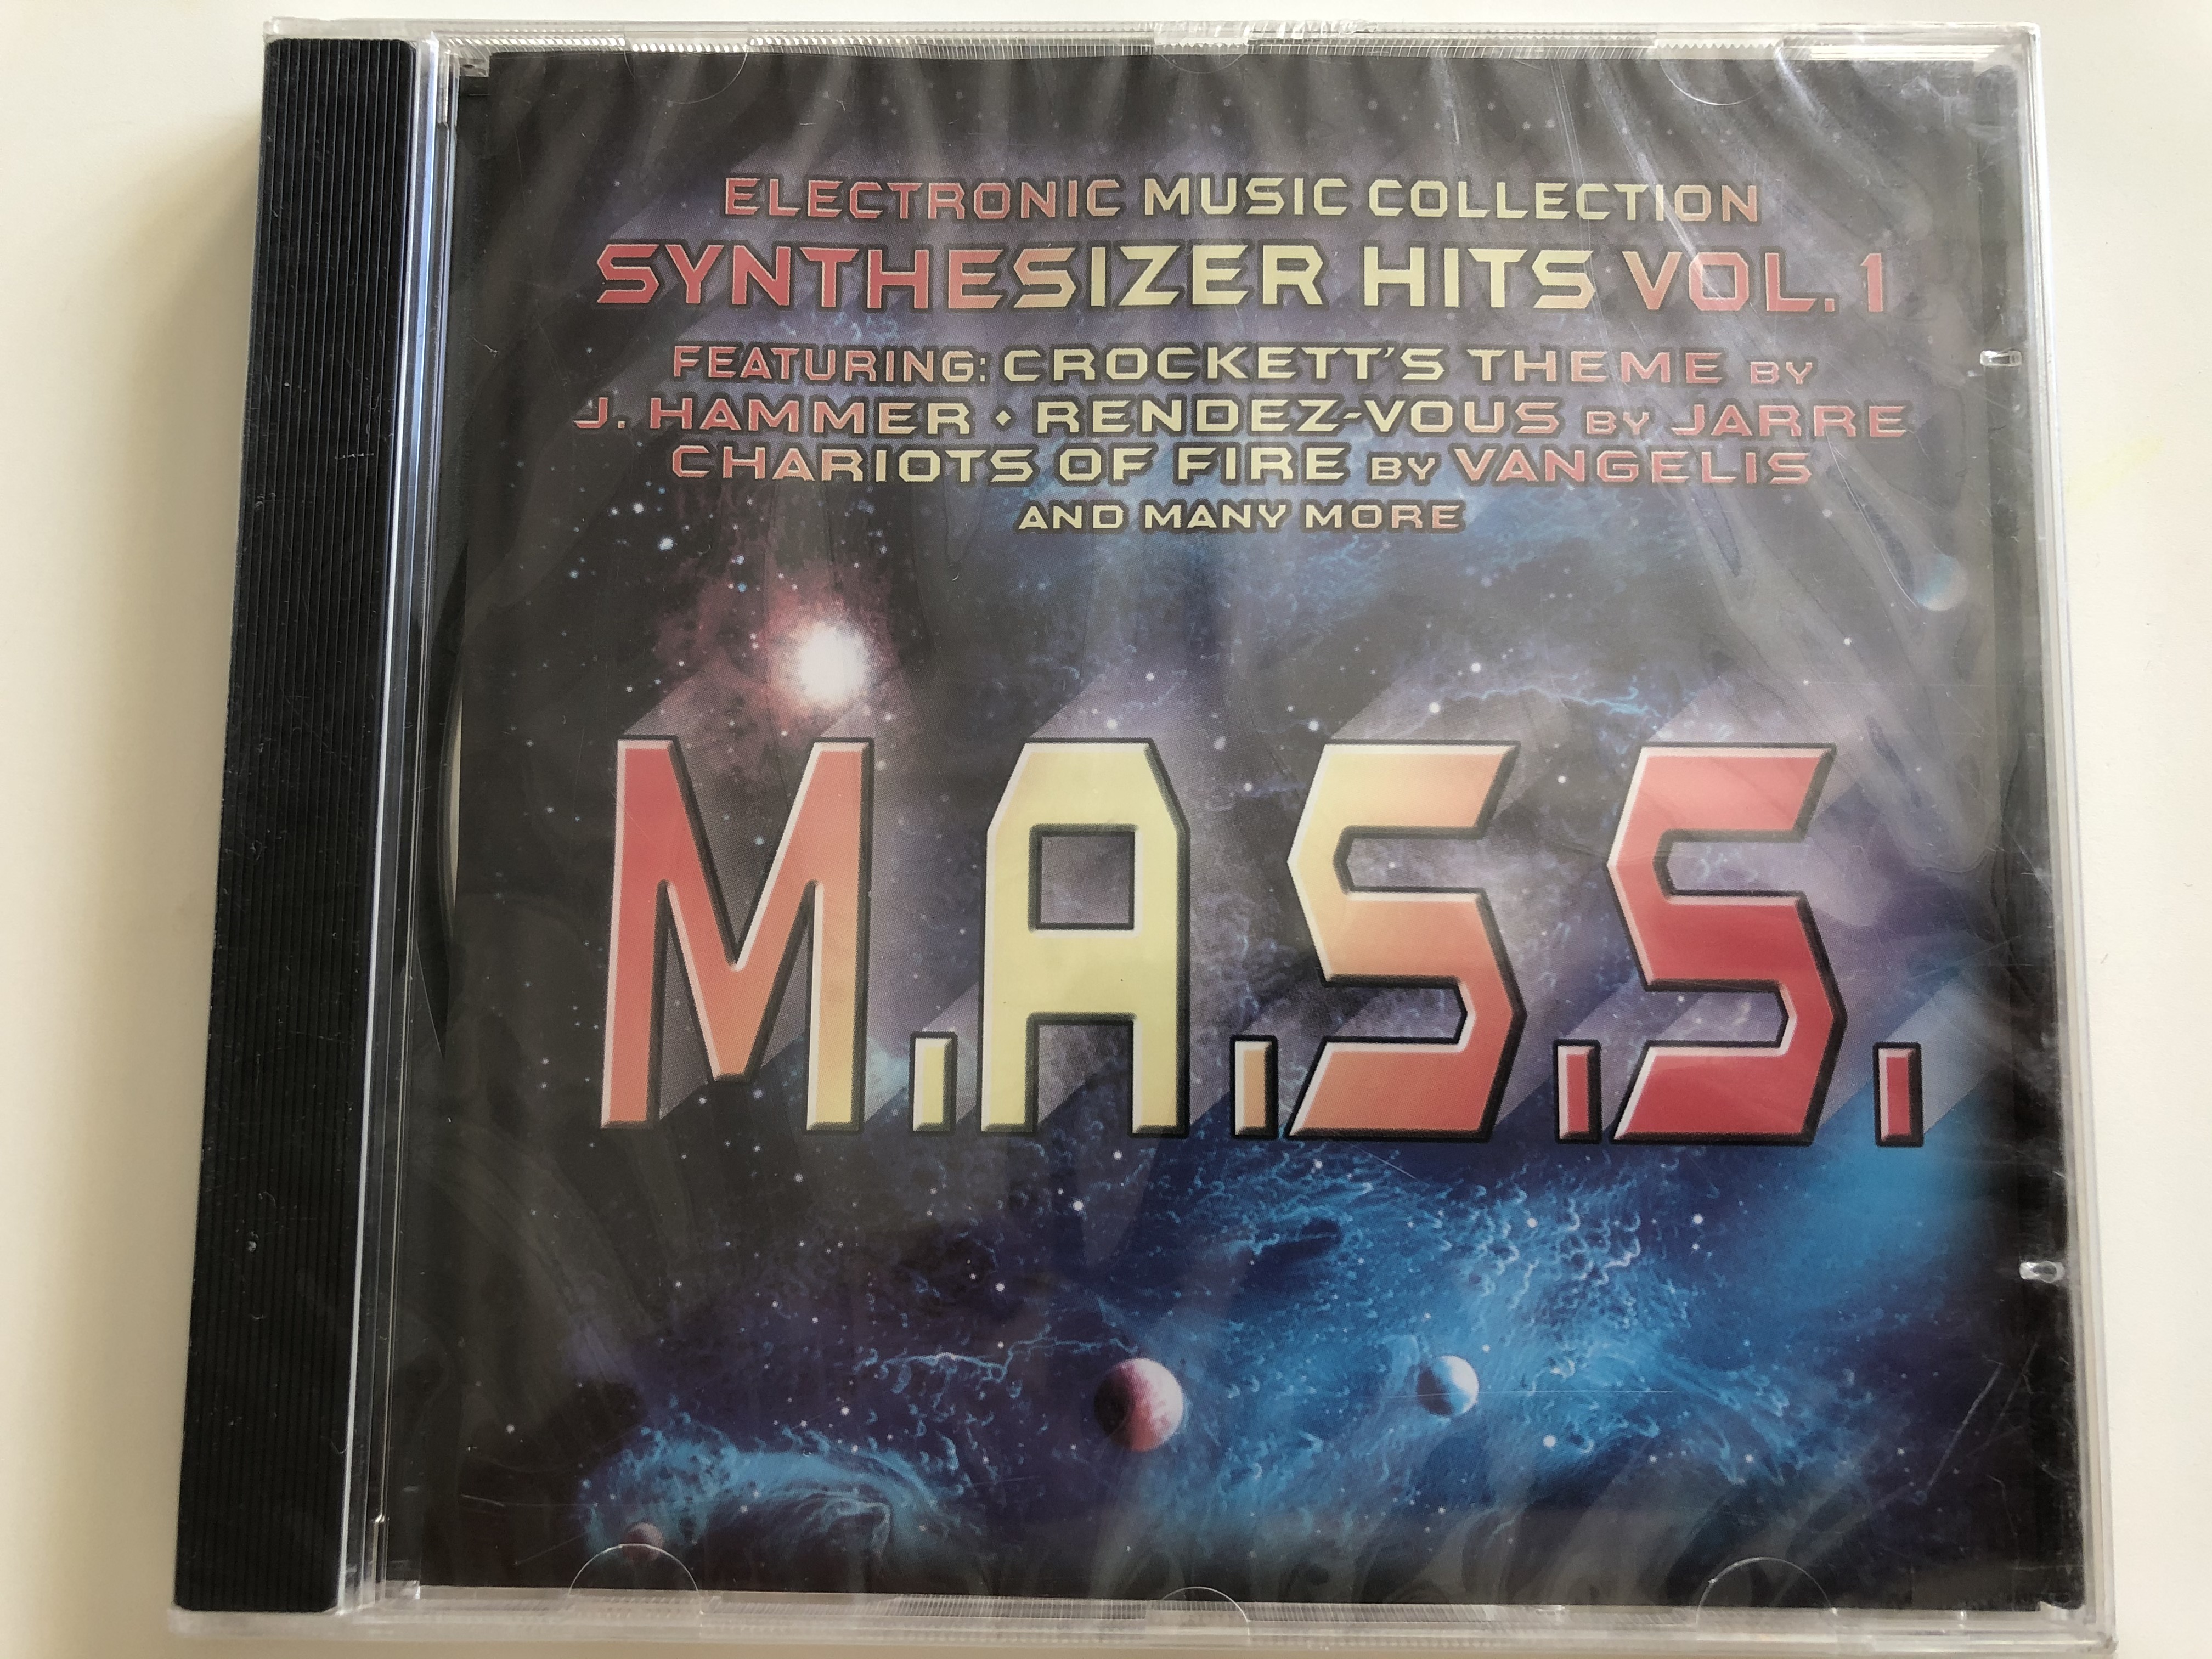 m.a.s.s.-electronic-music-collection-synthesizer-hits-vol.-1-featuring-crockett-s-theme-by-j.-hammer-rendez-vous-by-jarre-chariots-of-fire-by-vangelis-and-many-more-pastels-audio-cd-20-1-.jpg